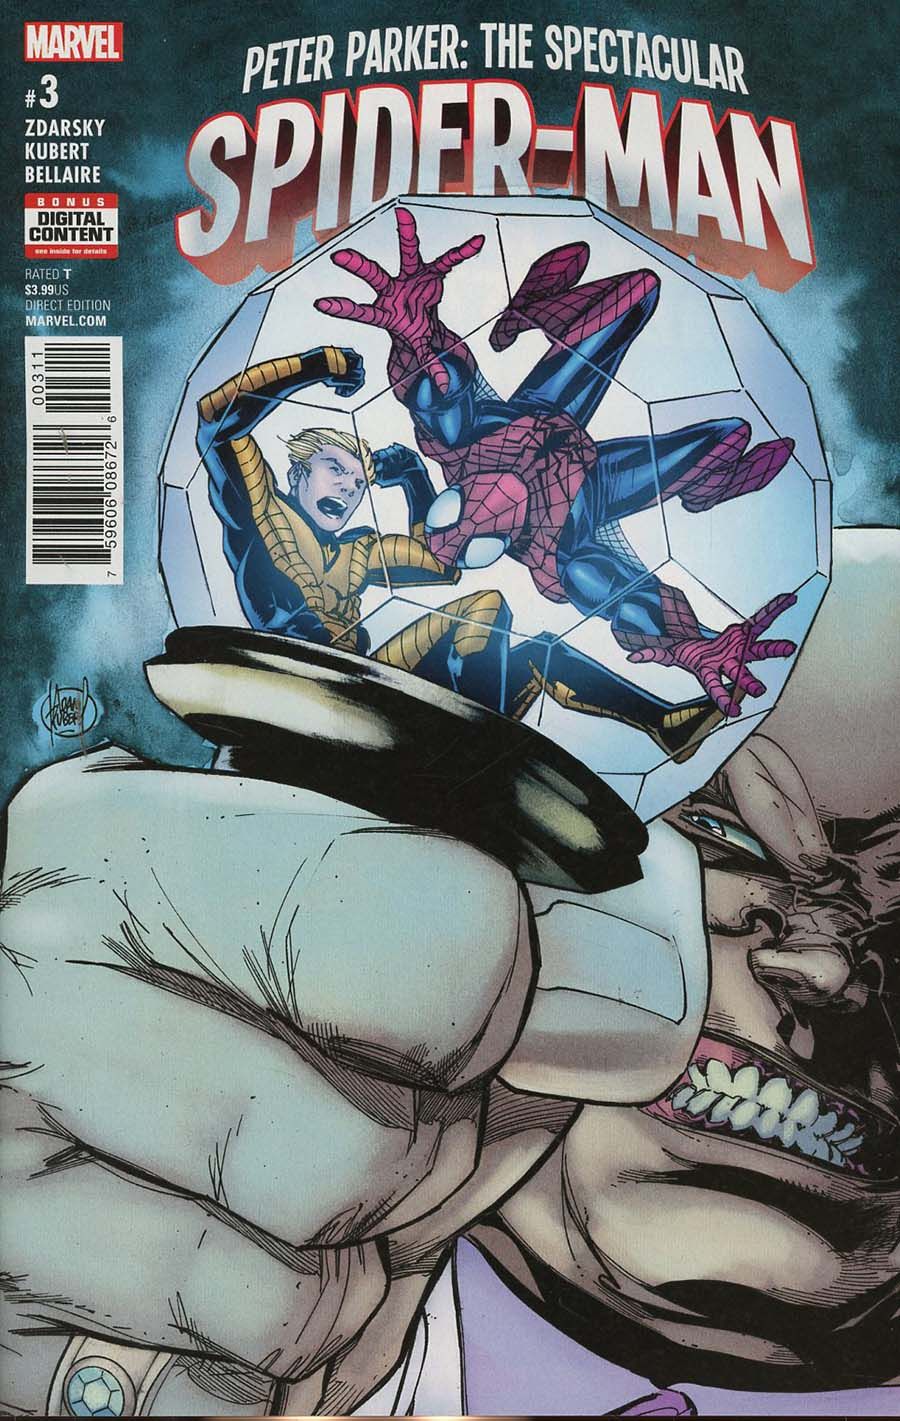 Peter Parker: The Spectacular Spider-man #3 Comic